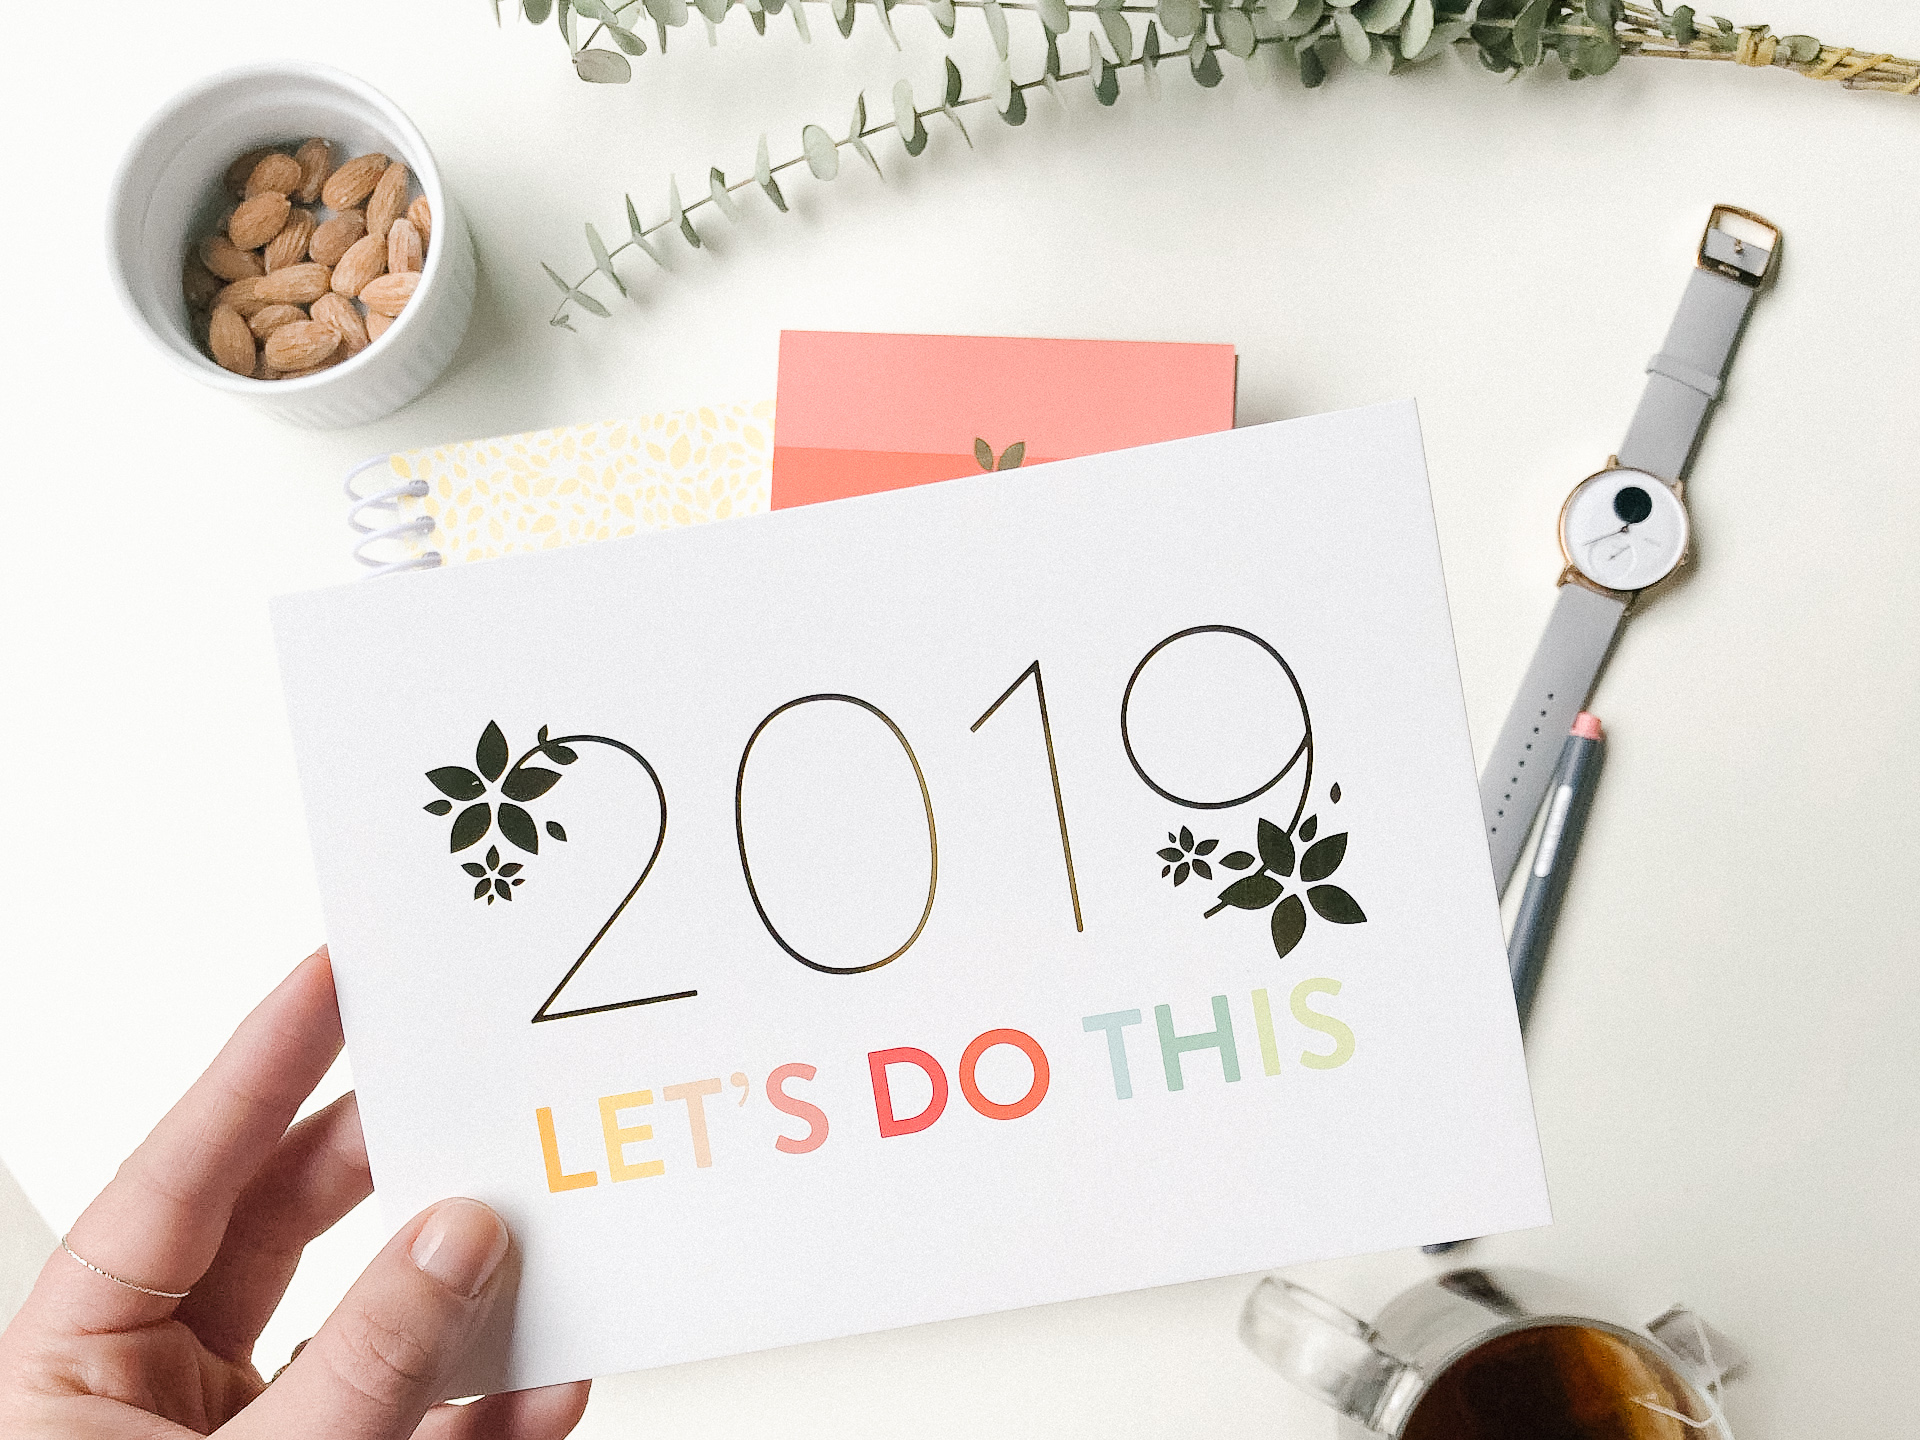 how to set goals that stick | plans + tools to turn those New Year's Resolutions into meaningful goals that help you live a purposeful year | hustle, entrepreneur, productivity, boss babe